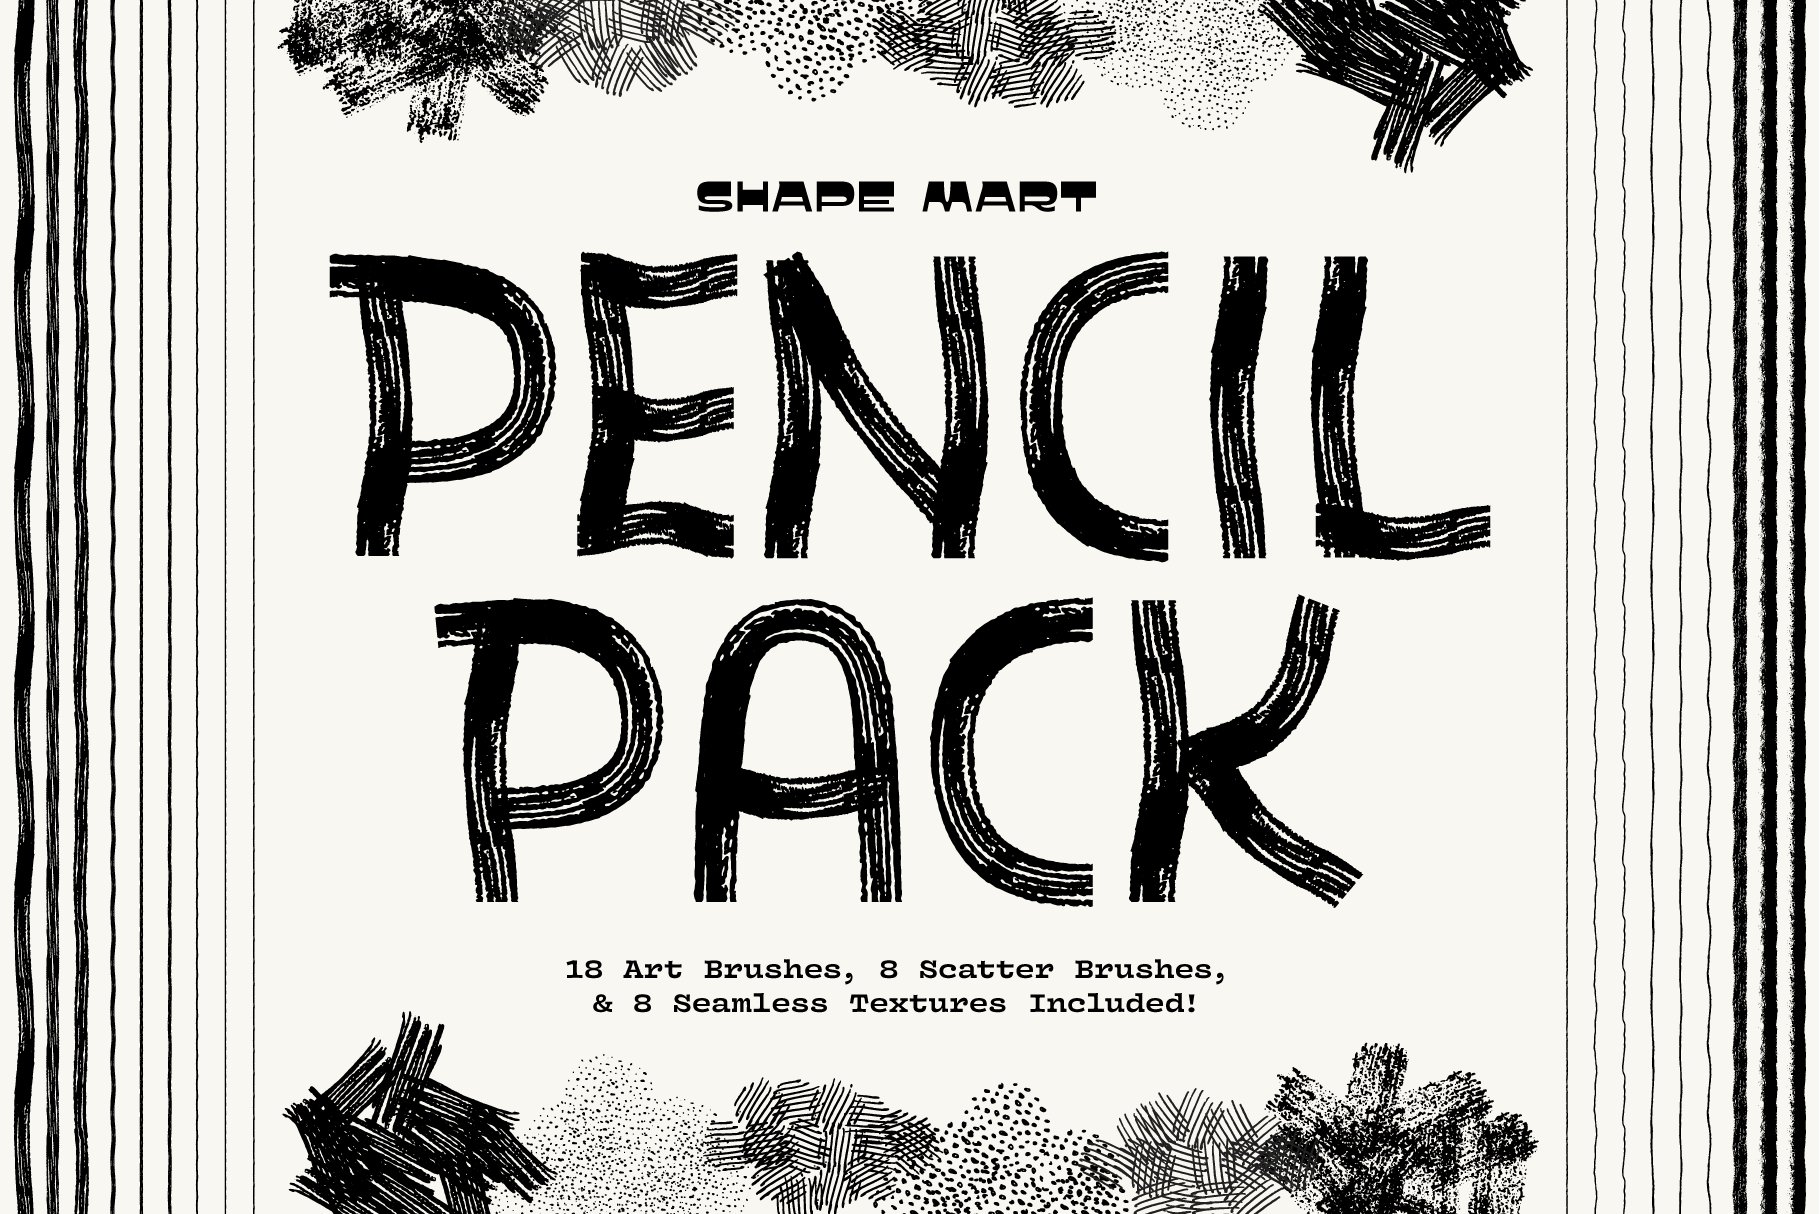 Pencil Pack cover image.